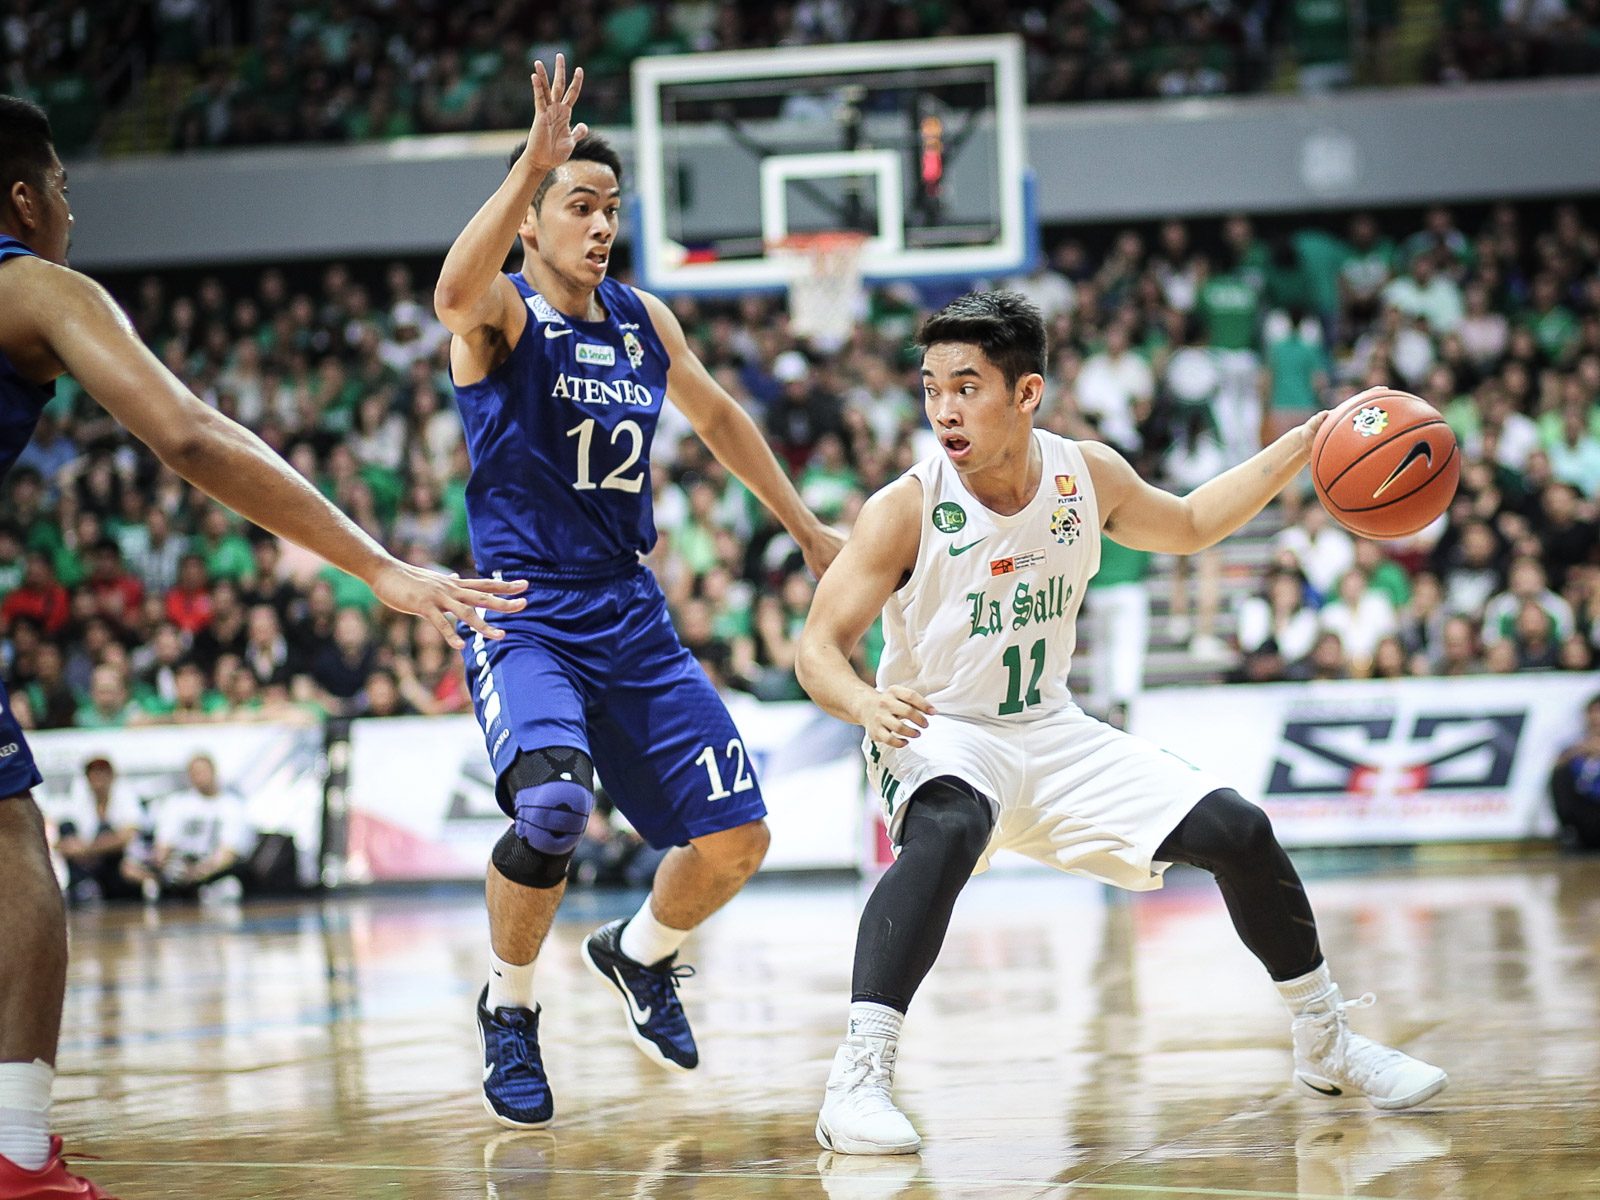 ROY Melecio shows guts of steel in first UAAP finals game